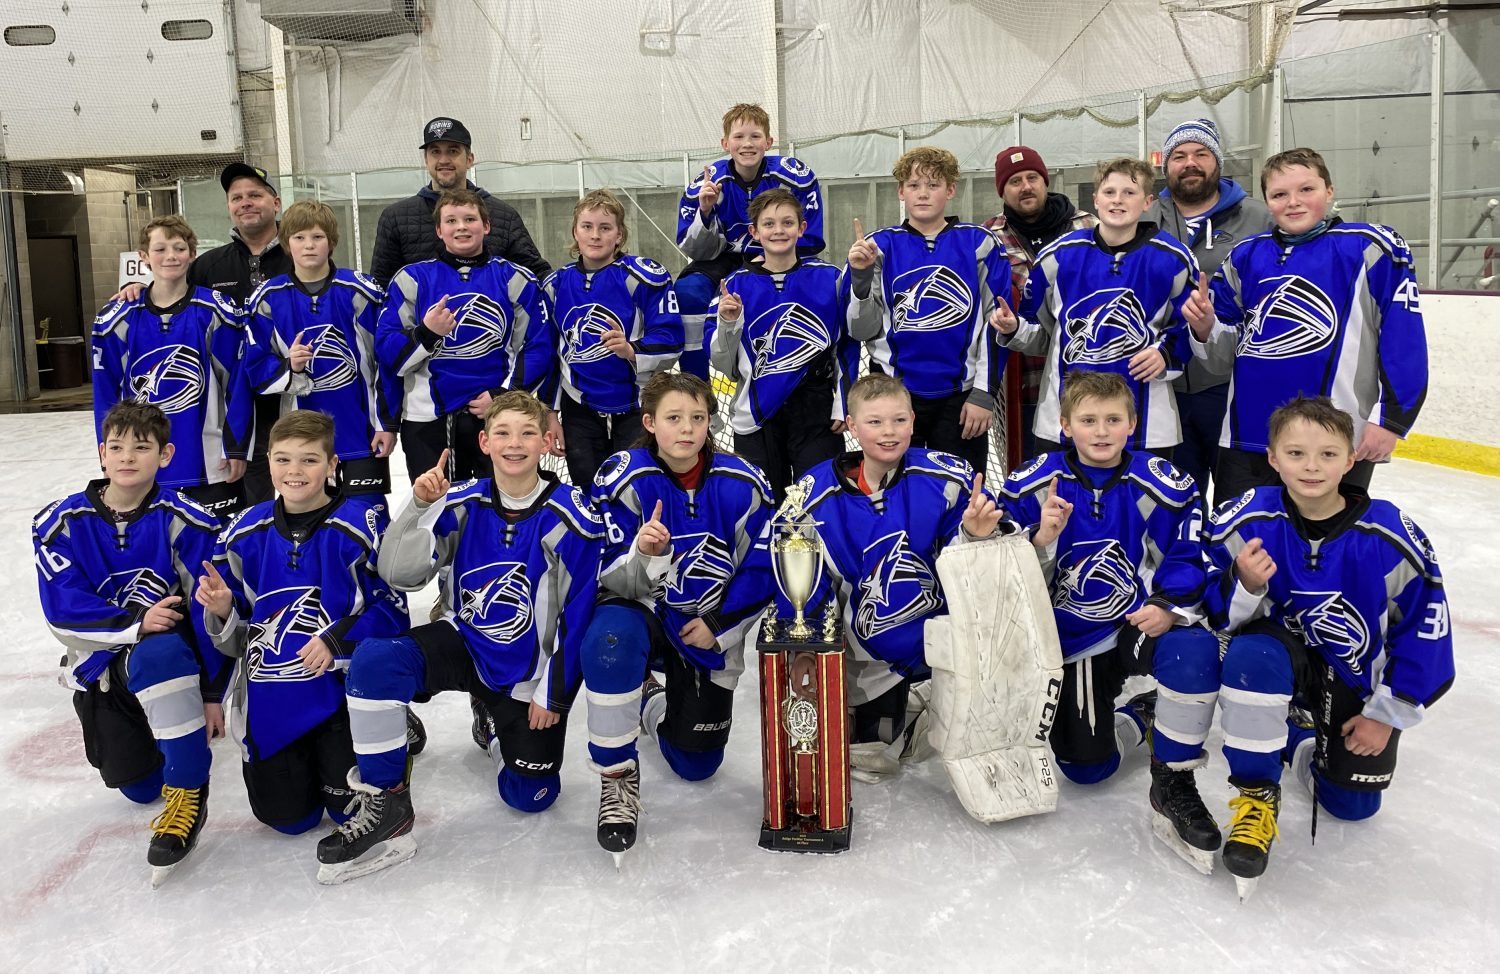 Merrill PeeWees bring home first place, four years in a row